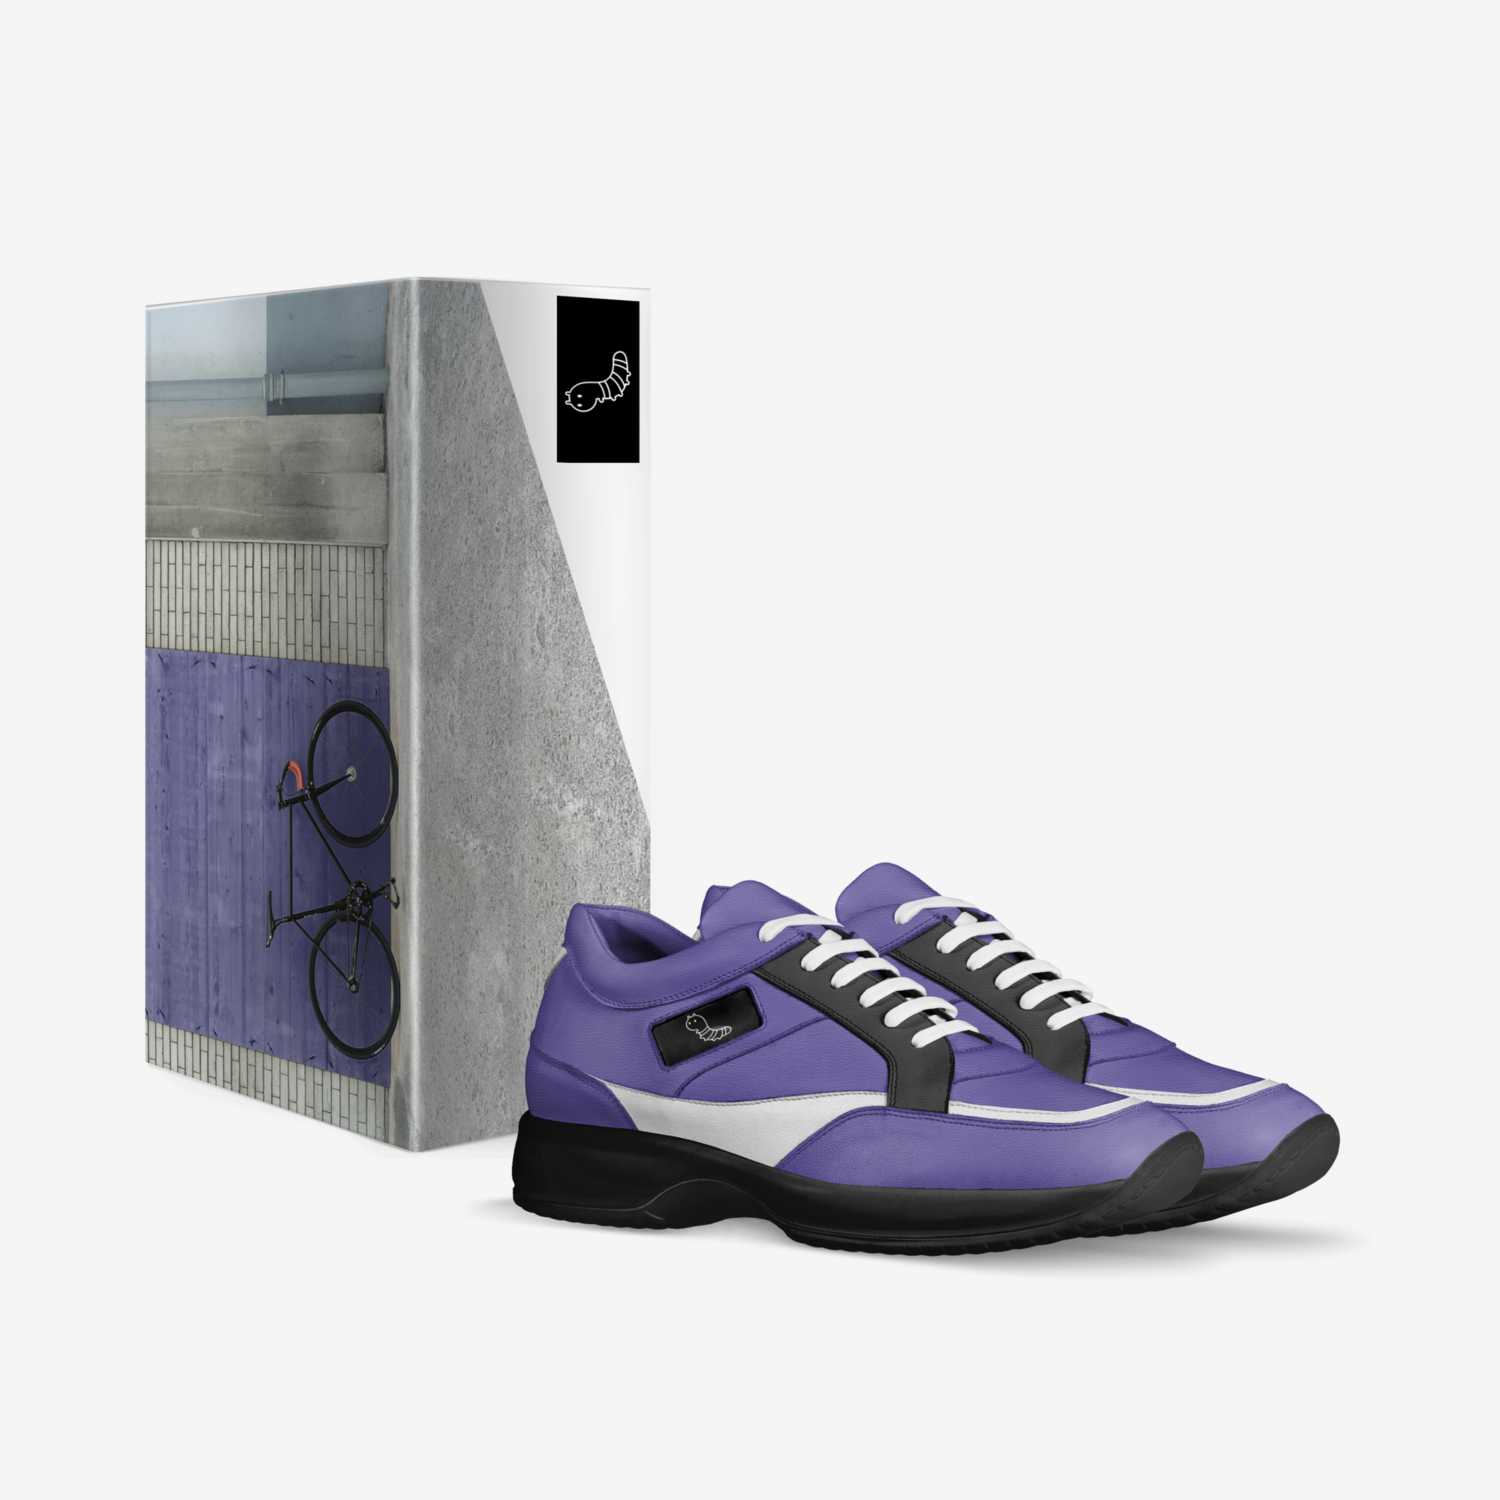 Granddaddy Purp’s custom made in Italy shoes by Zachary Sanders | Box view